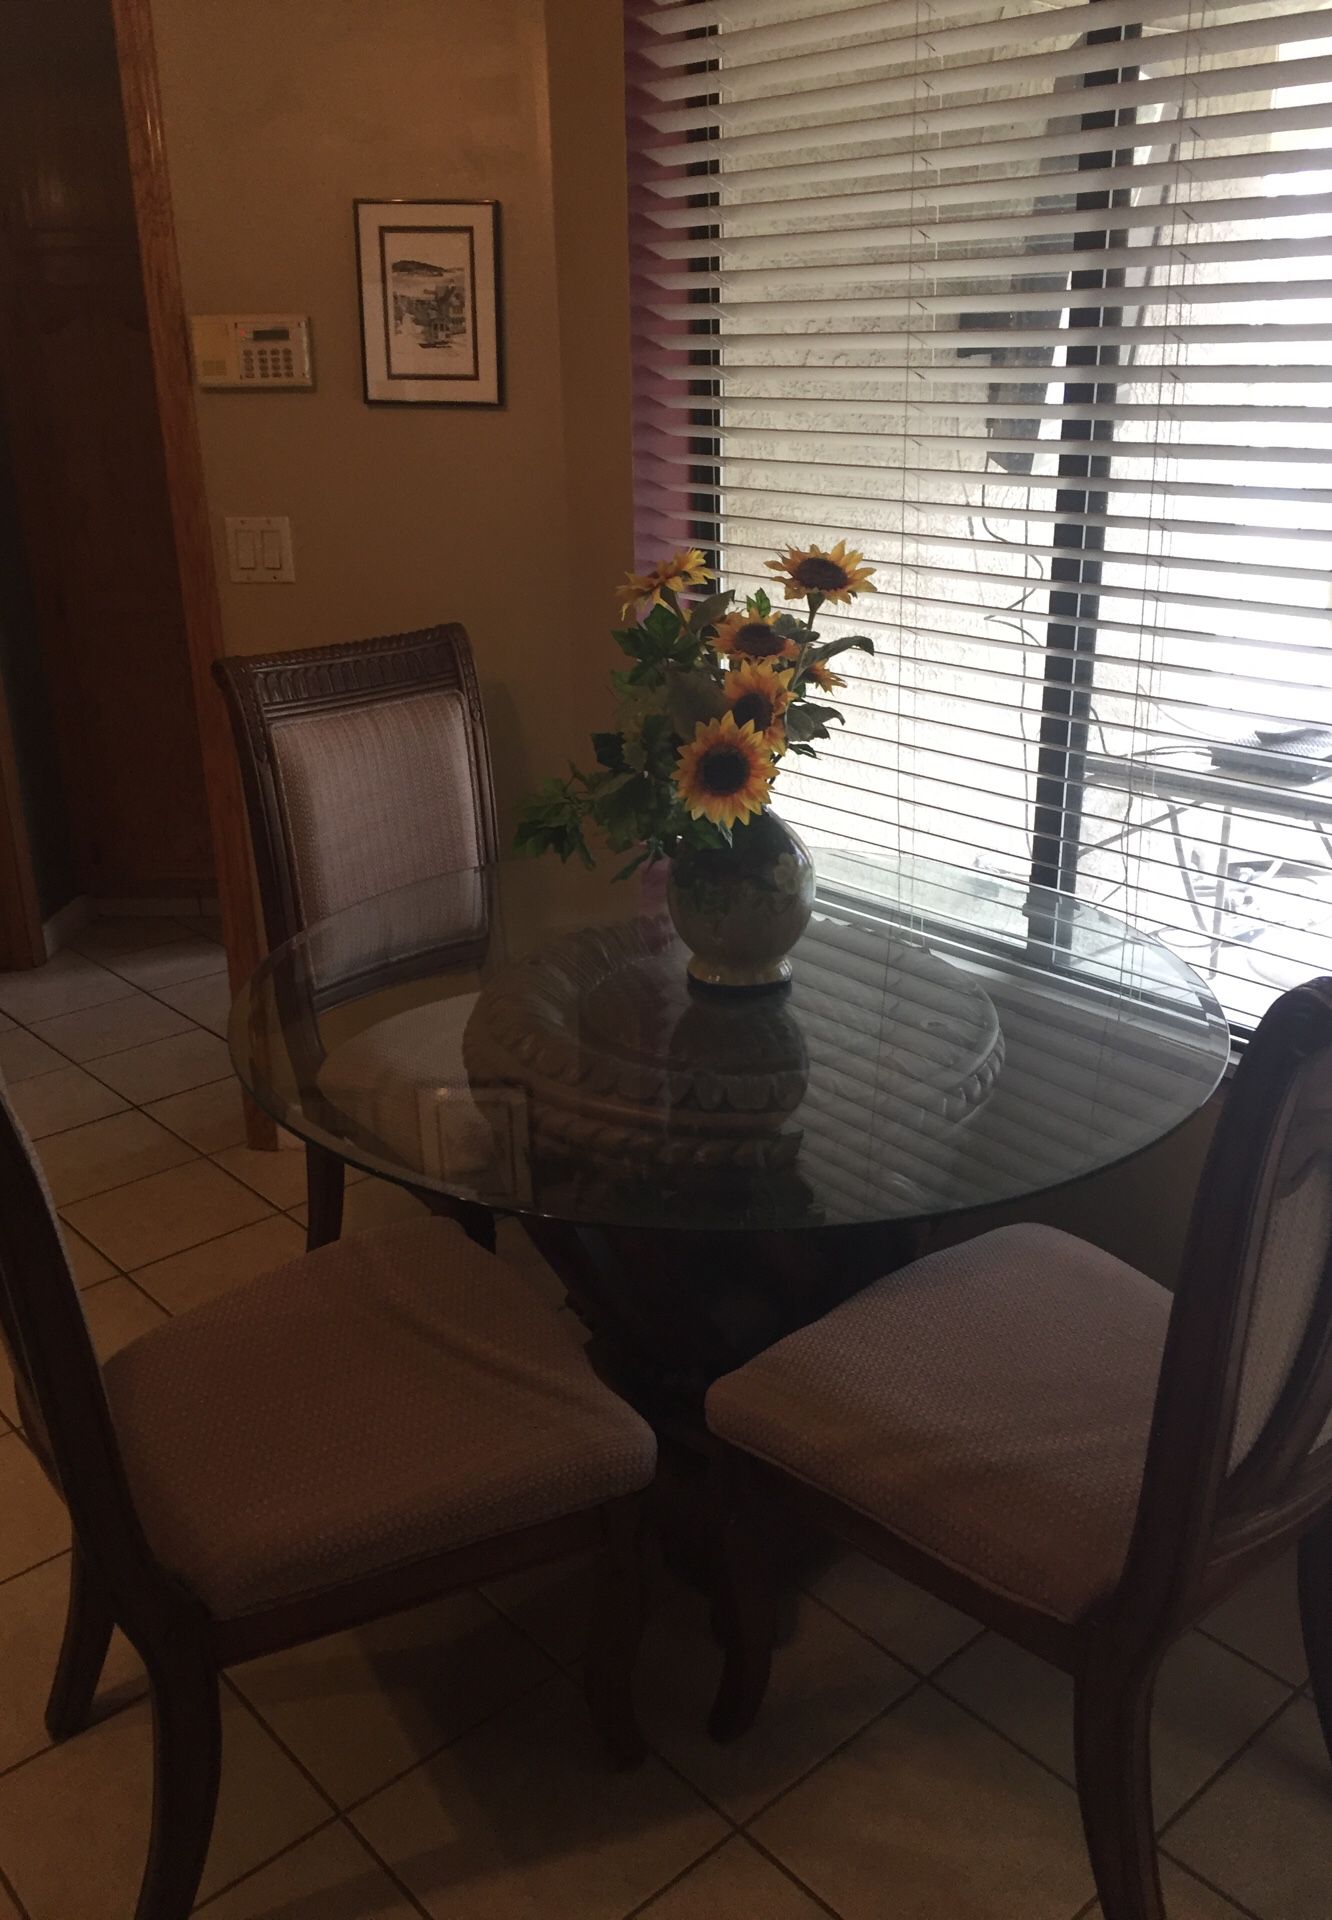 Beveled glass table four chairs